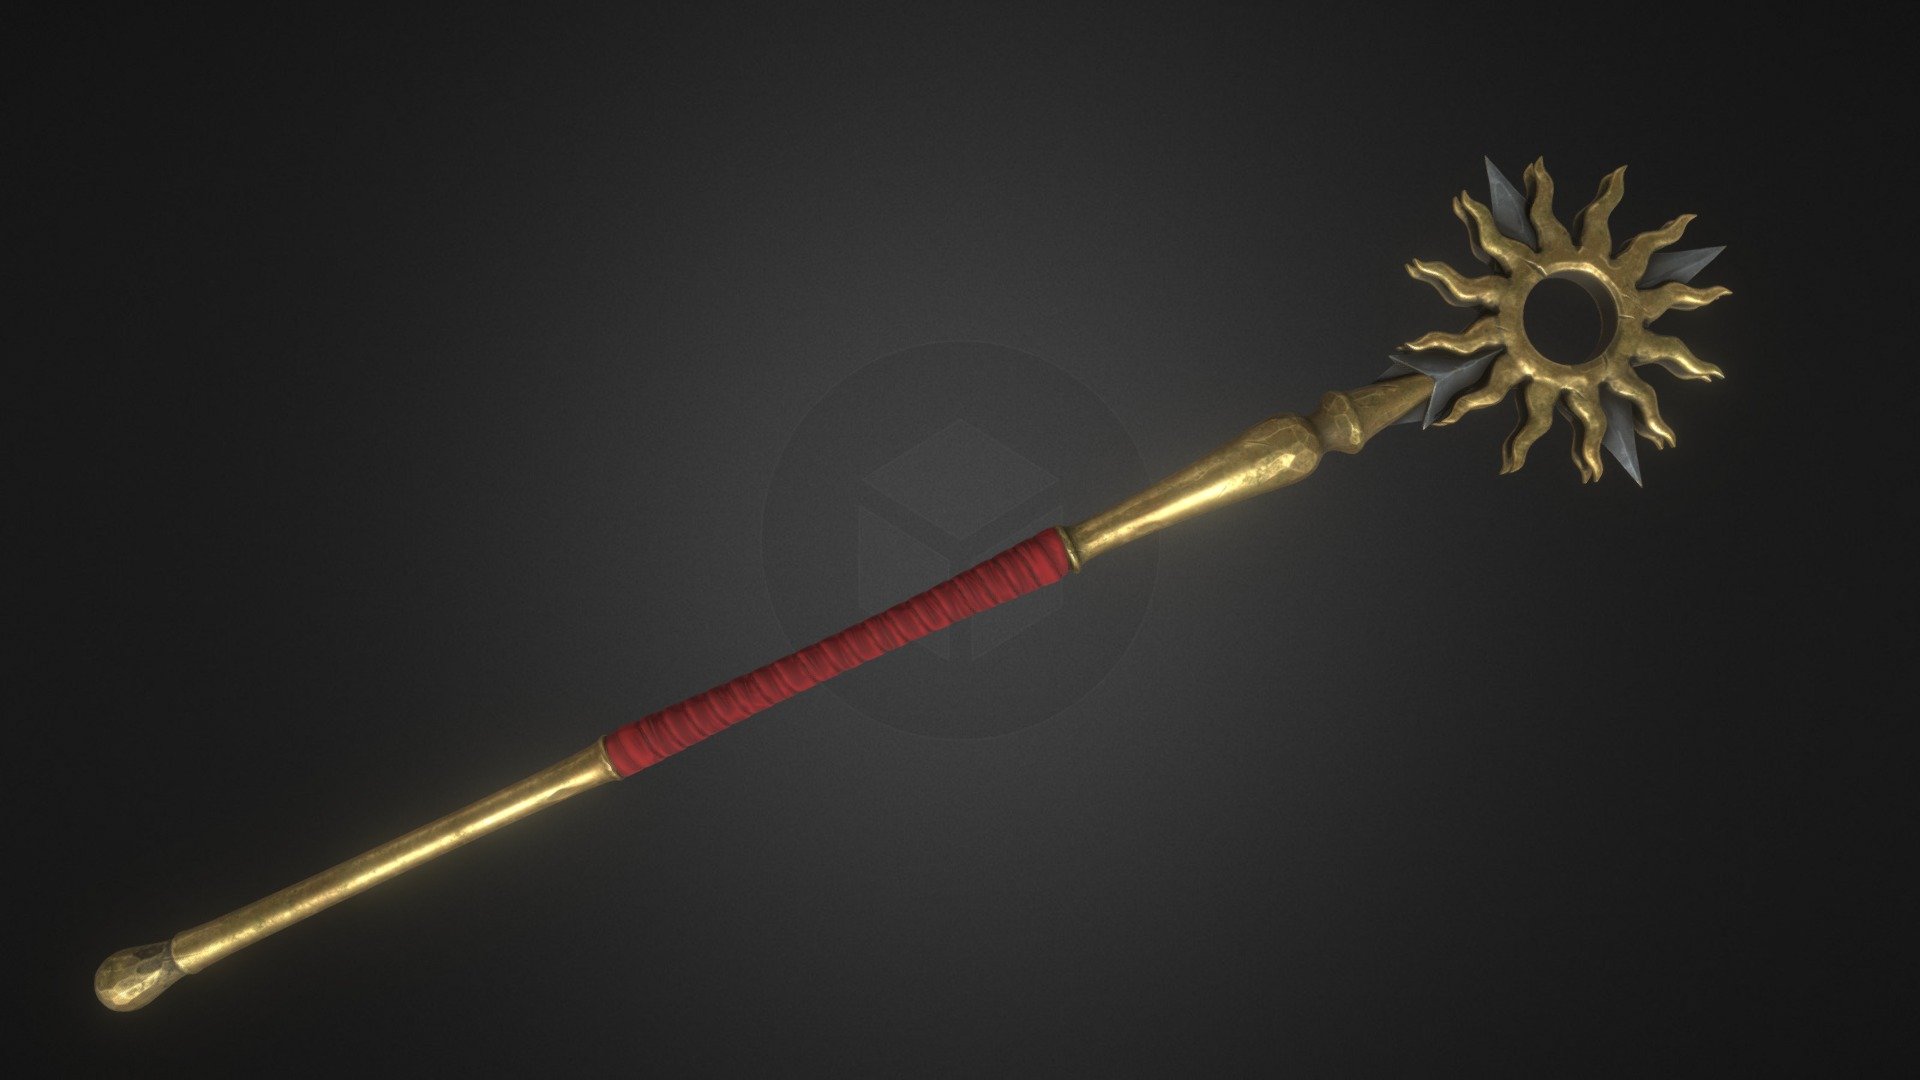 Staff of sun

Low poly game ready model. Total polycount 23557 tris.

PBR Metallic - Roughness 2k textures.

Model created on Blender. Textured with Substance Painter 3d model